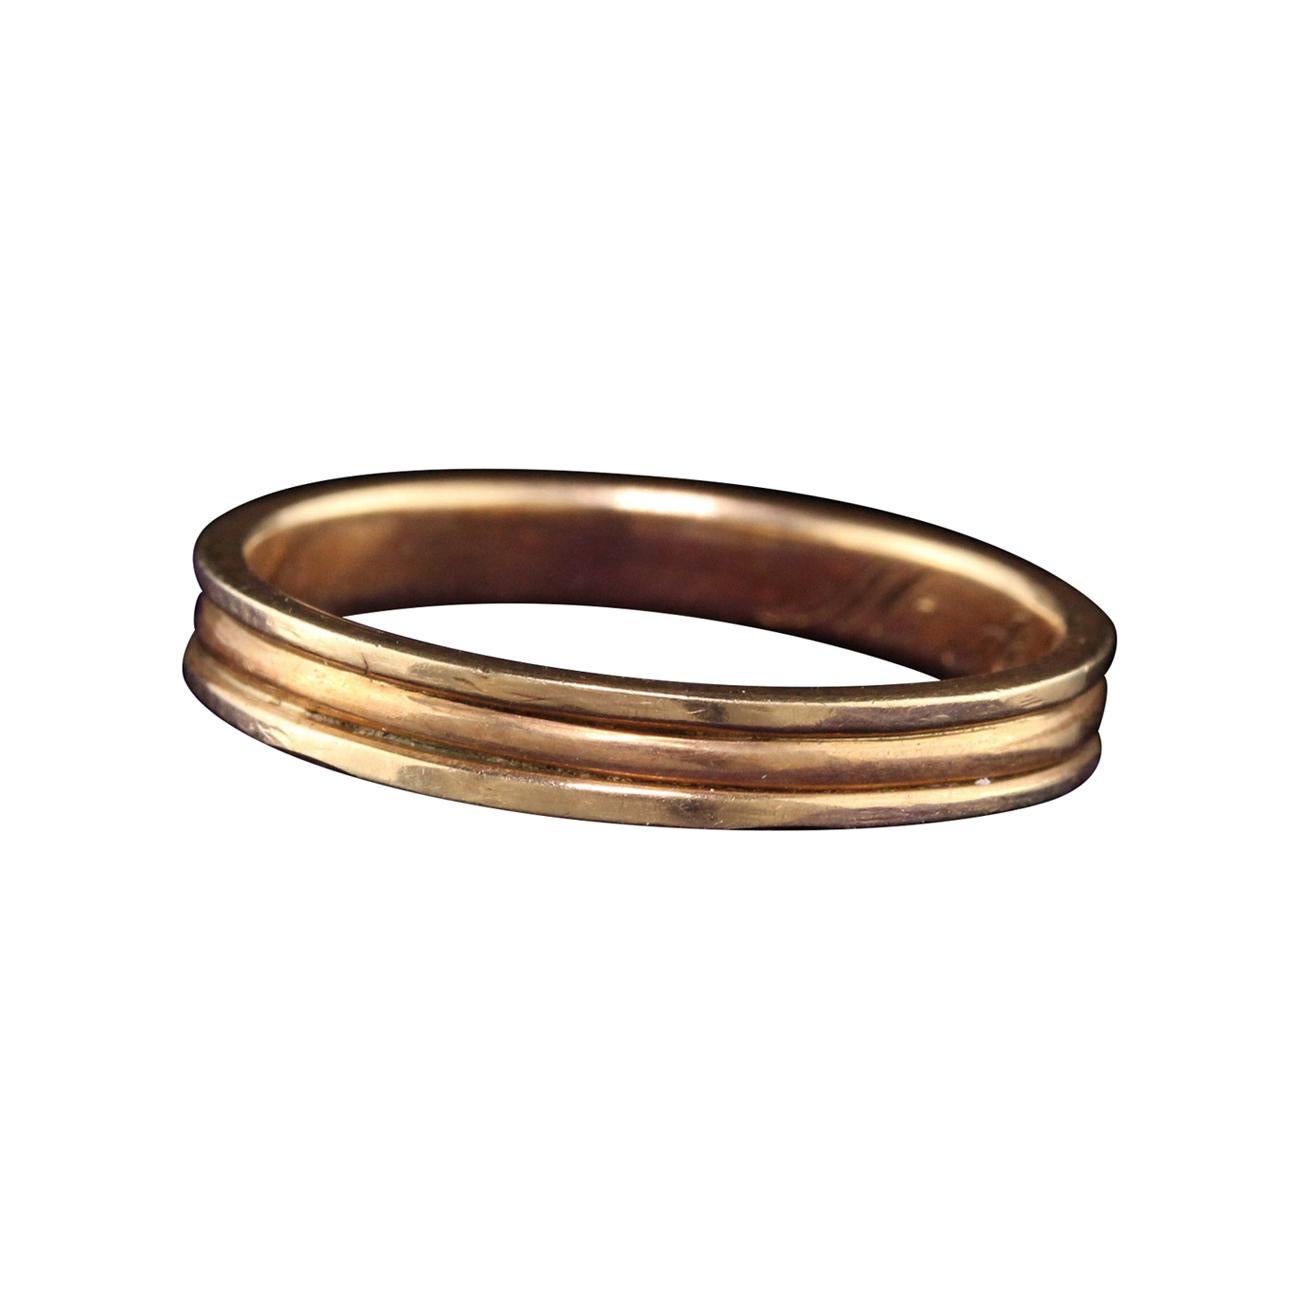 Antique Victorian 14k Yellow Gold Engraved Wedding Band